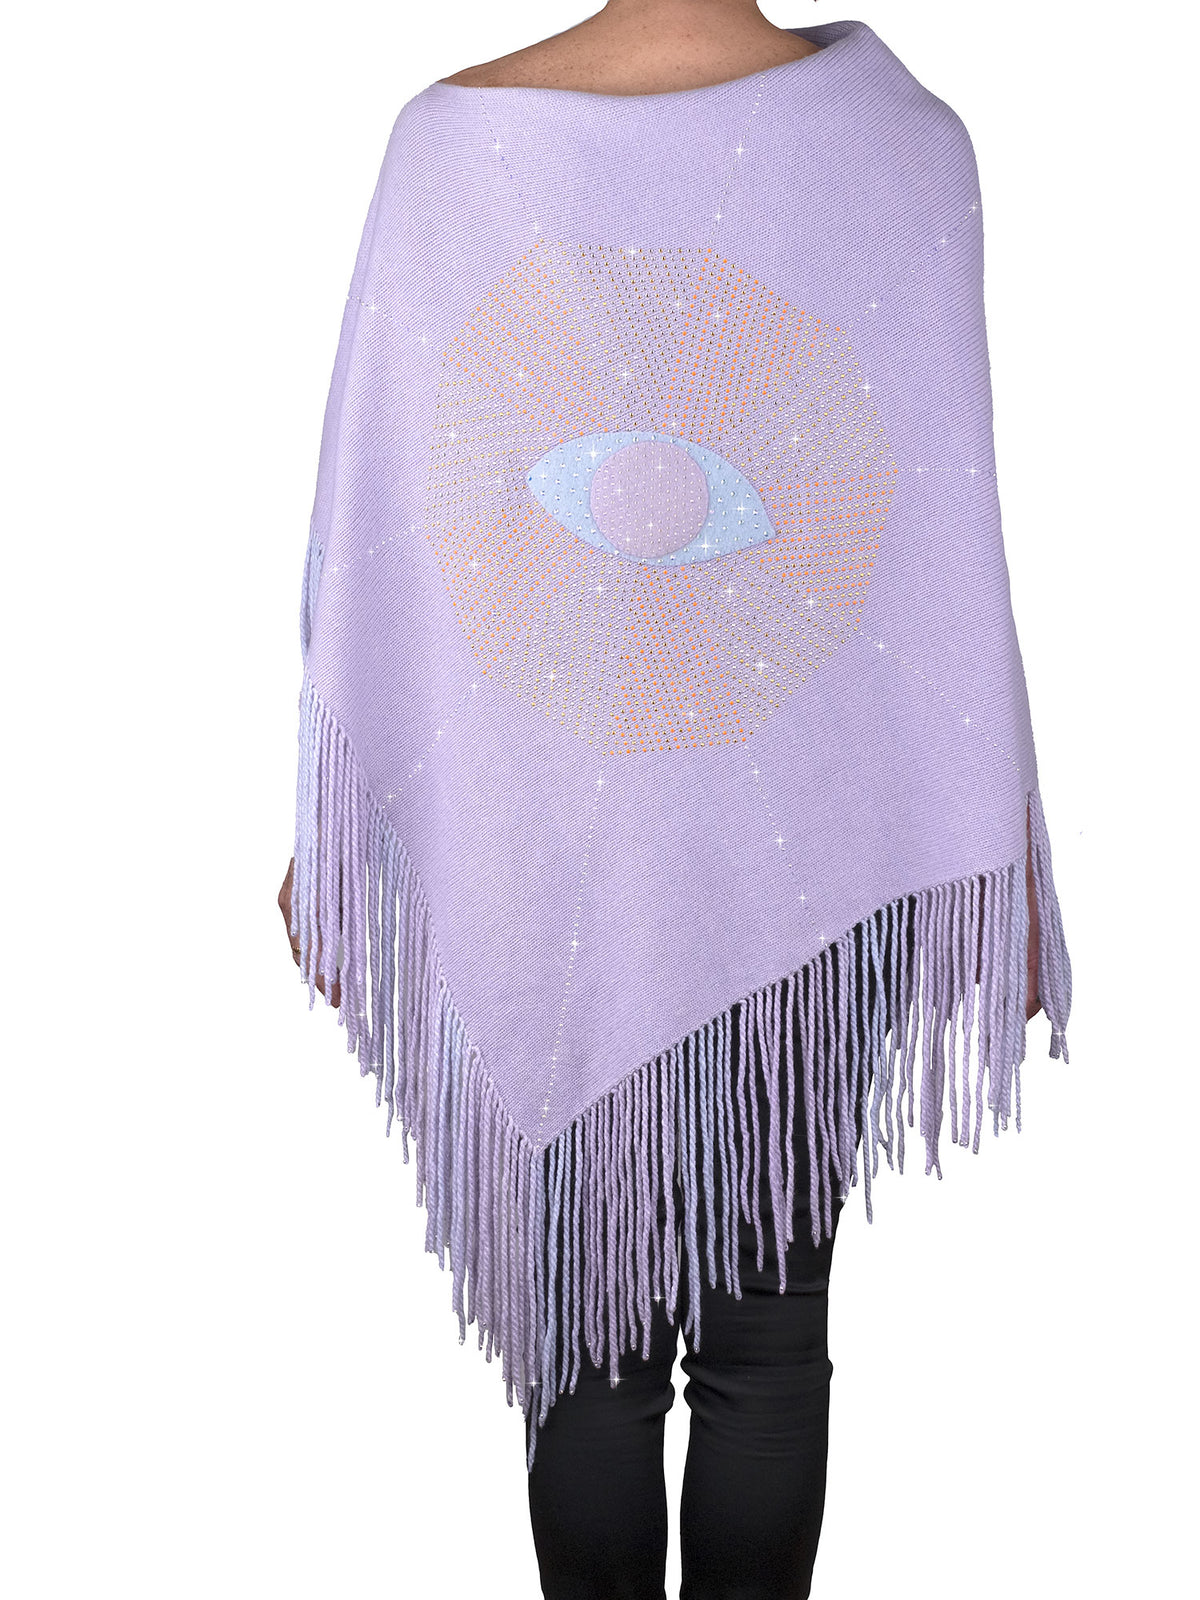 'Lilac' Out of This World Poncho- size M/L